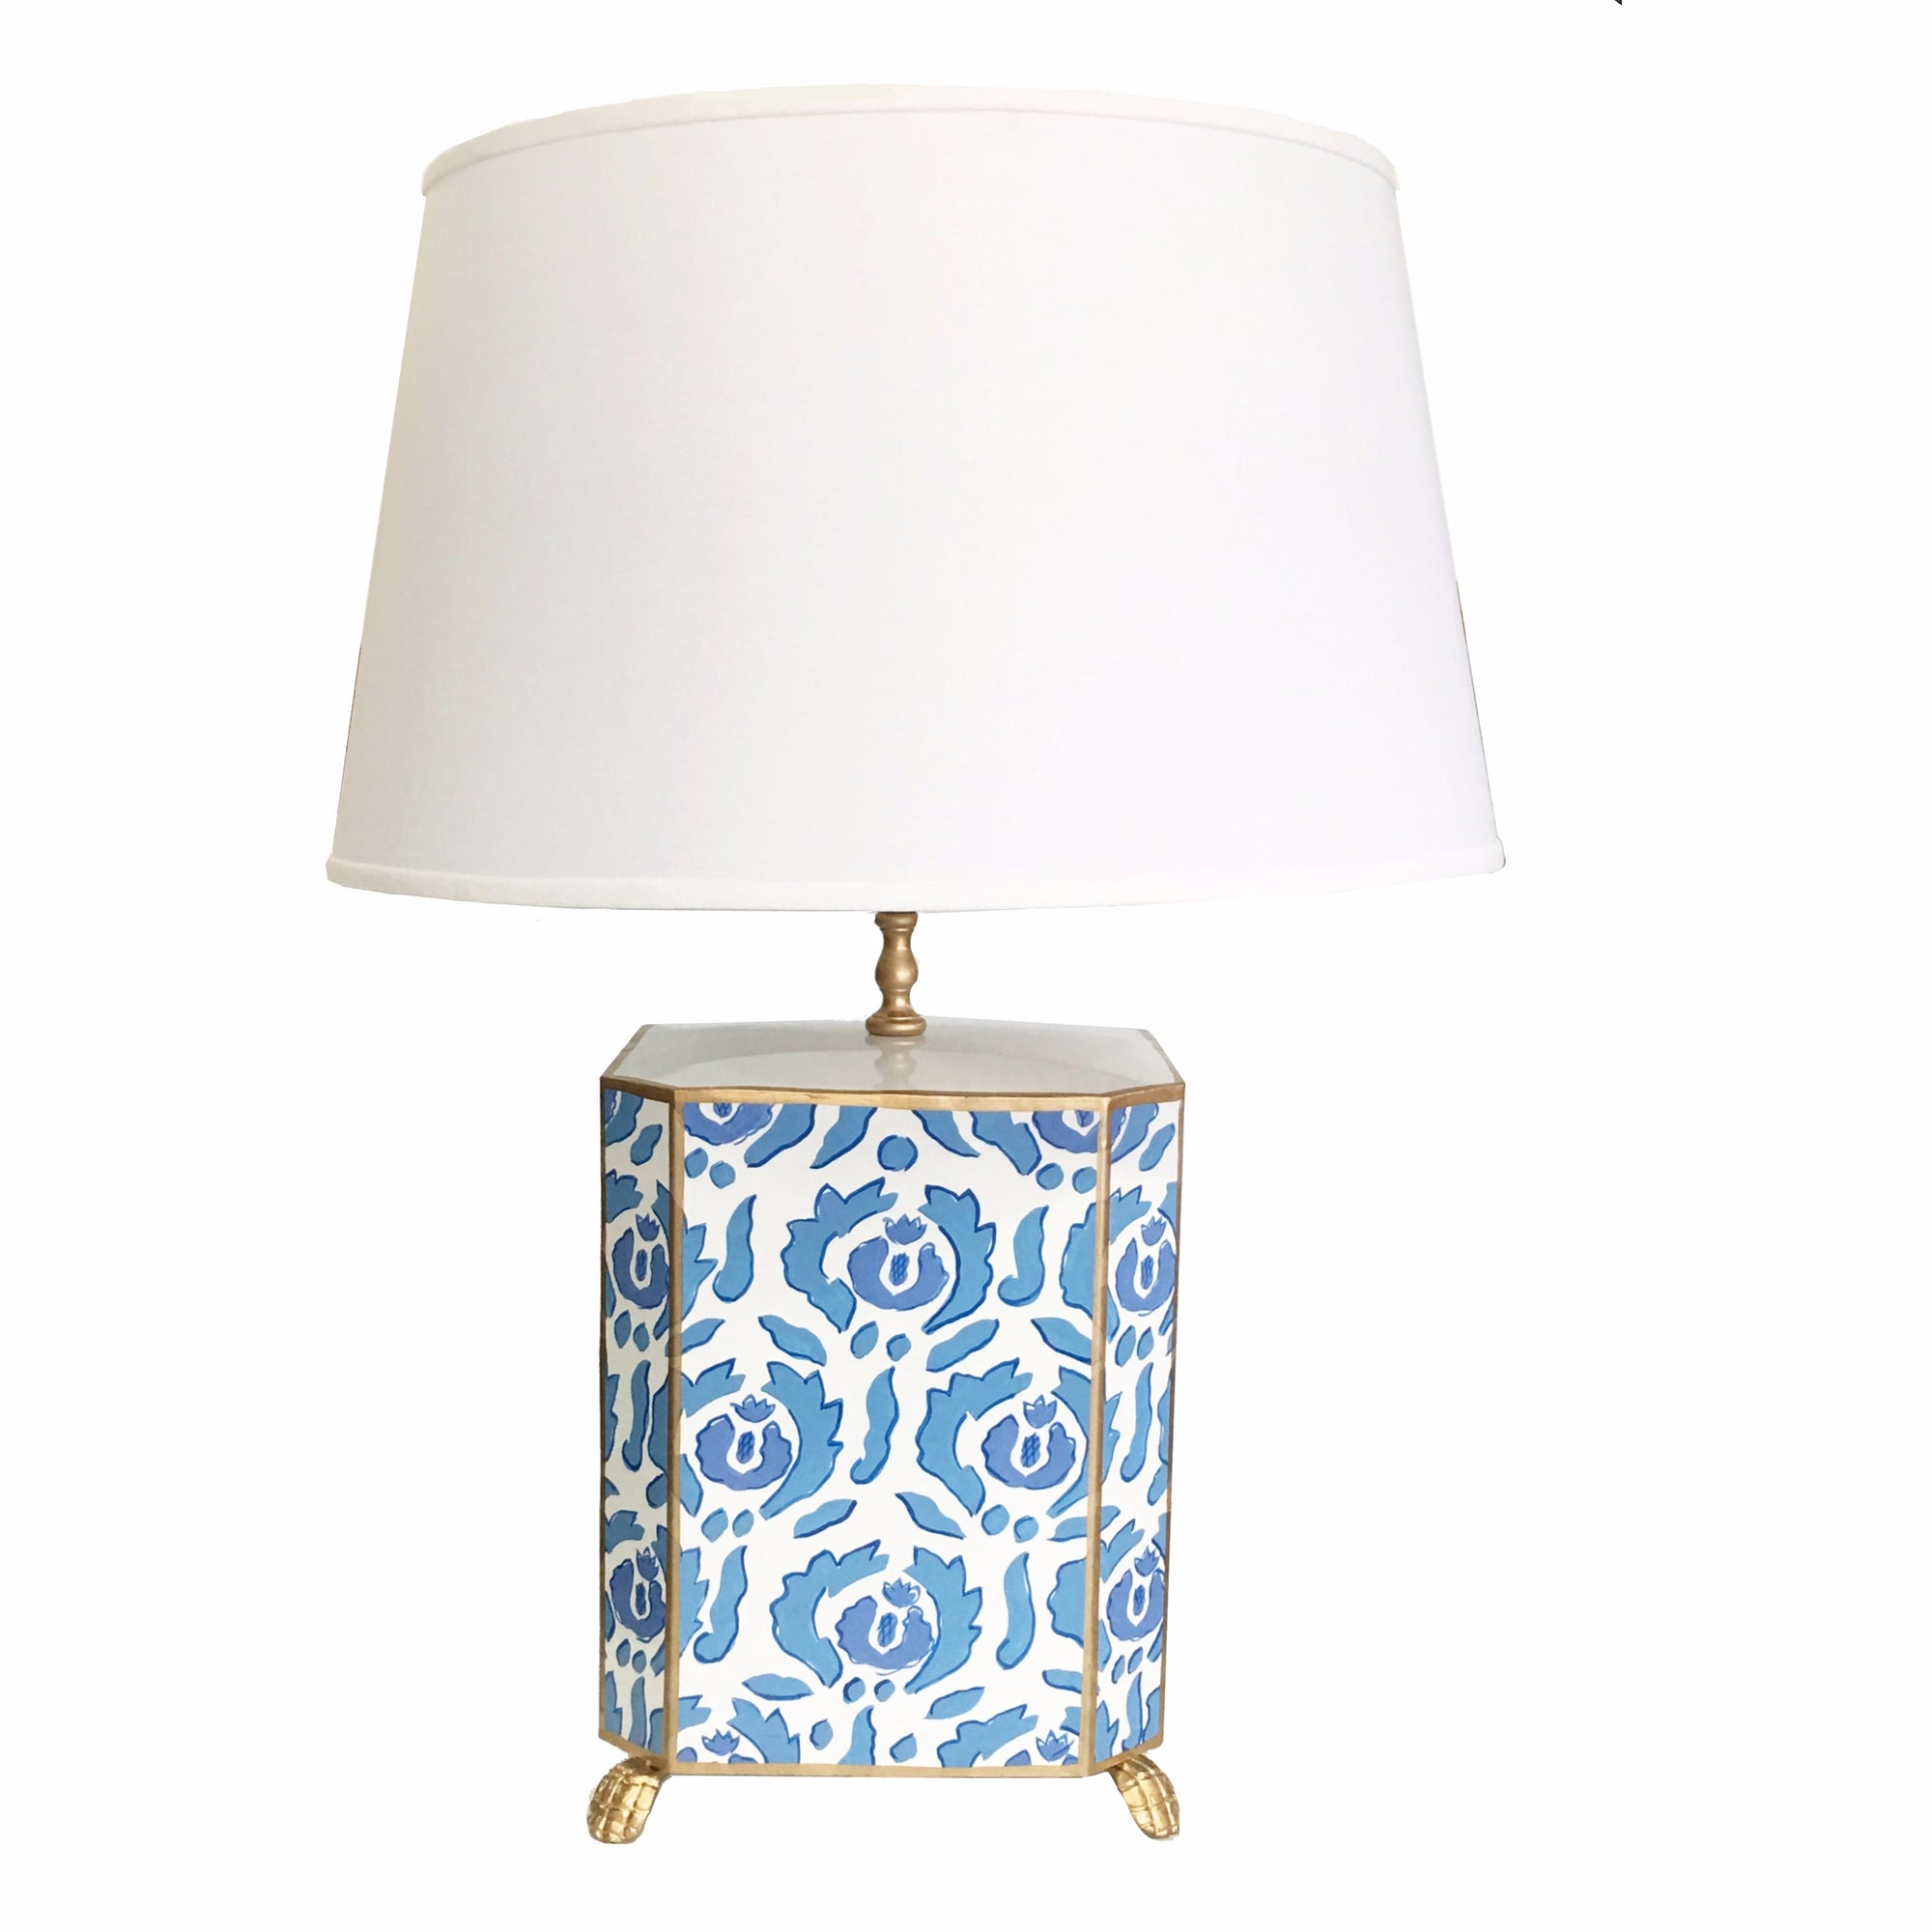 Dana Gibson Beaufont Lamp in Blue, Large